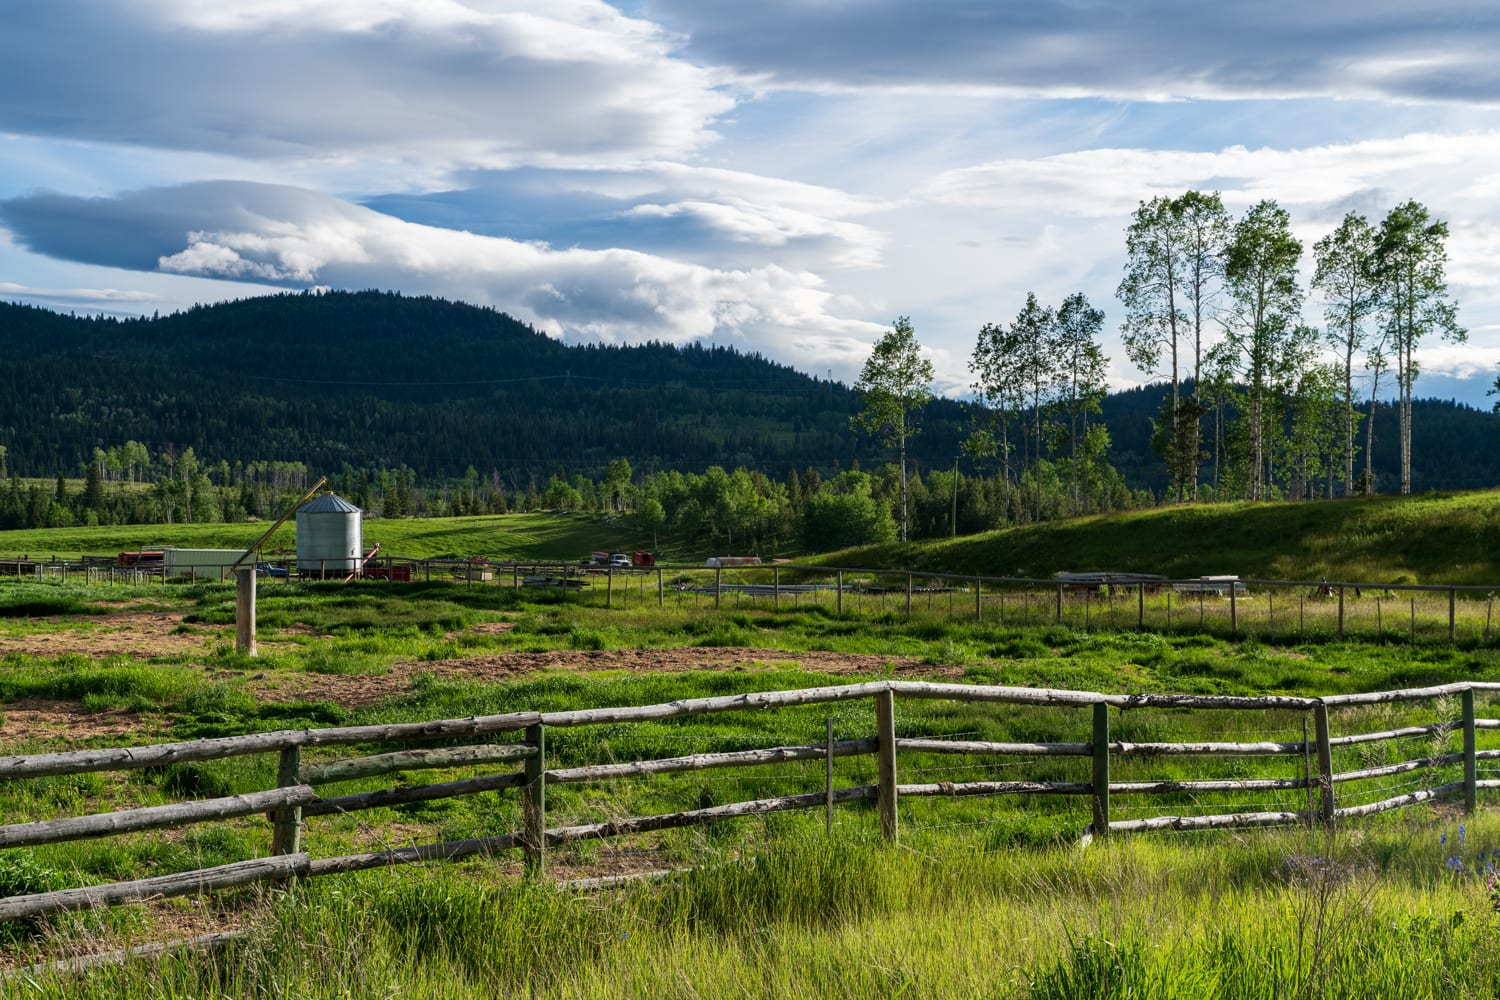 Kamloops rural life tall grass with wooden fence and equipment with mountain